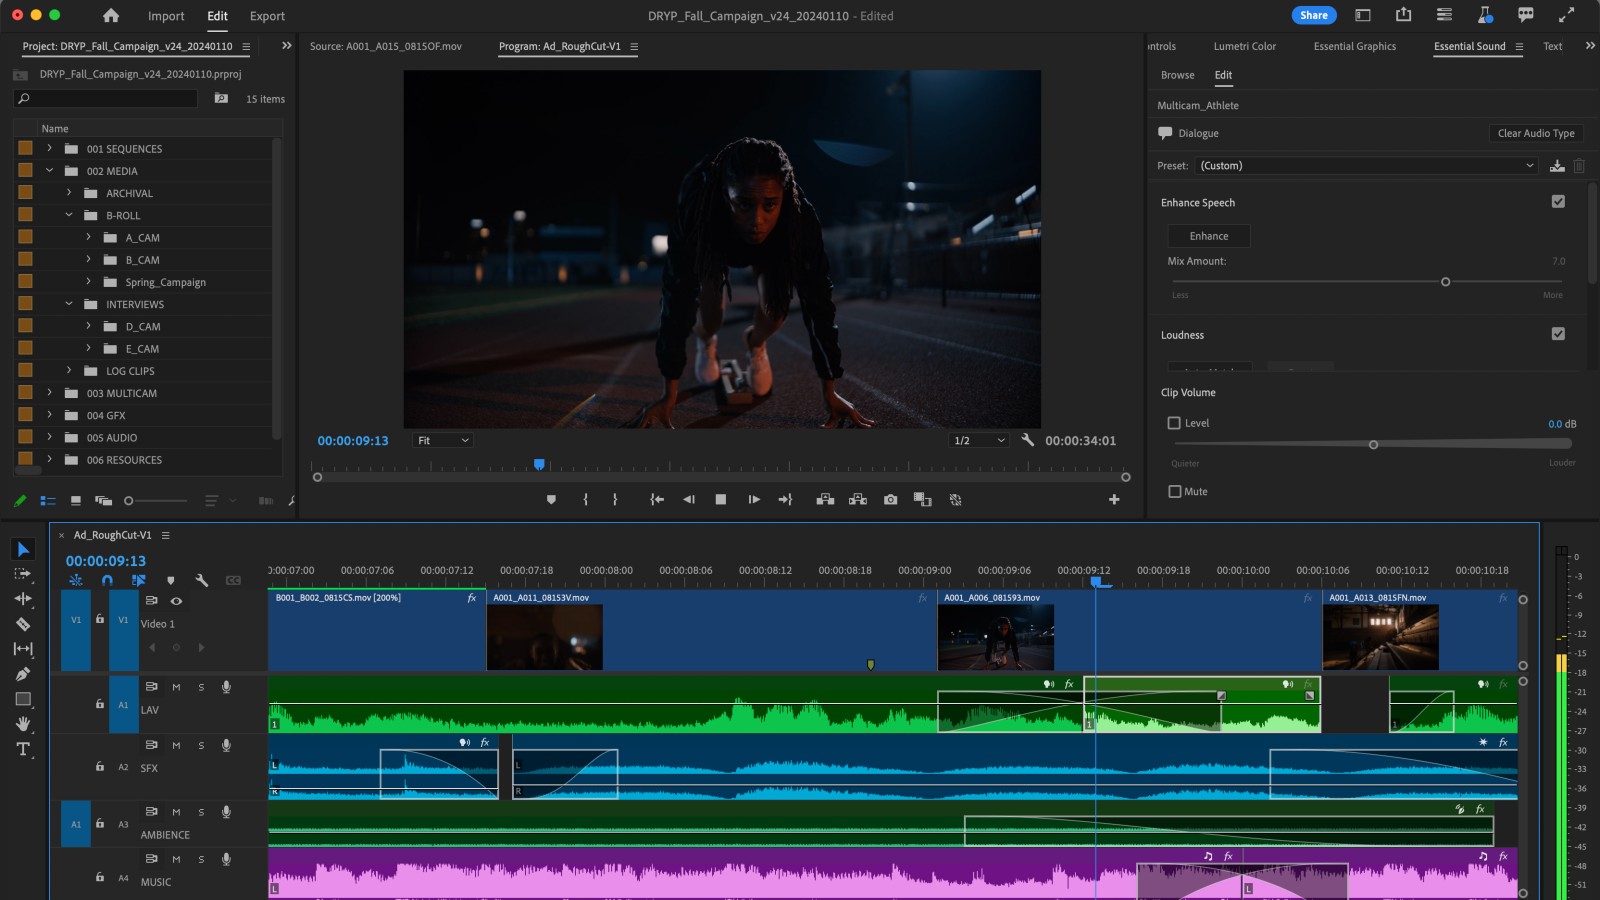 Adobe simplifies audio editing in new Premiere Pro update | Technology ...